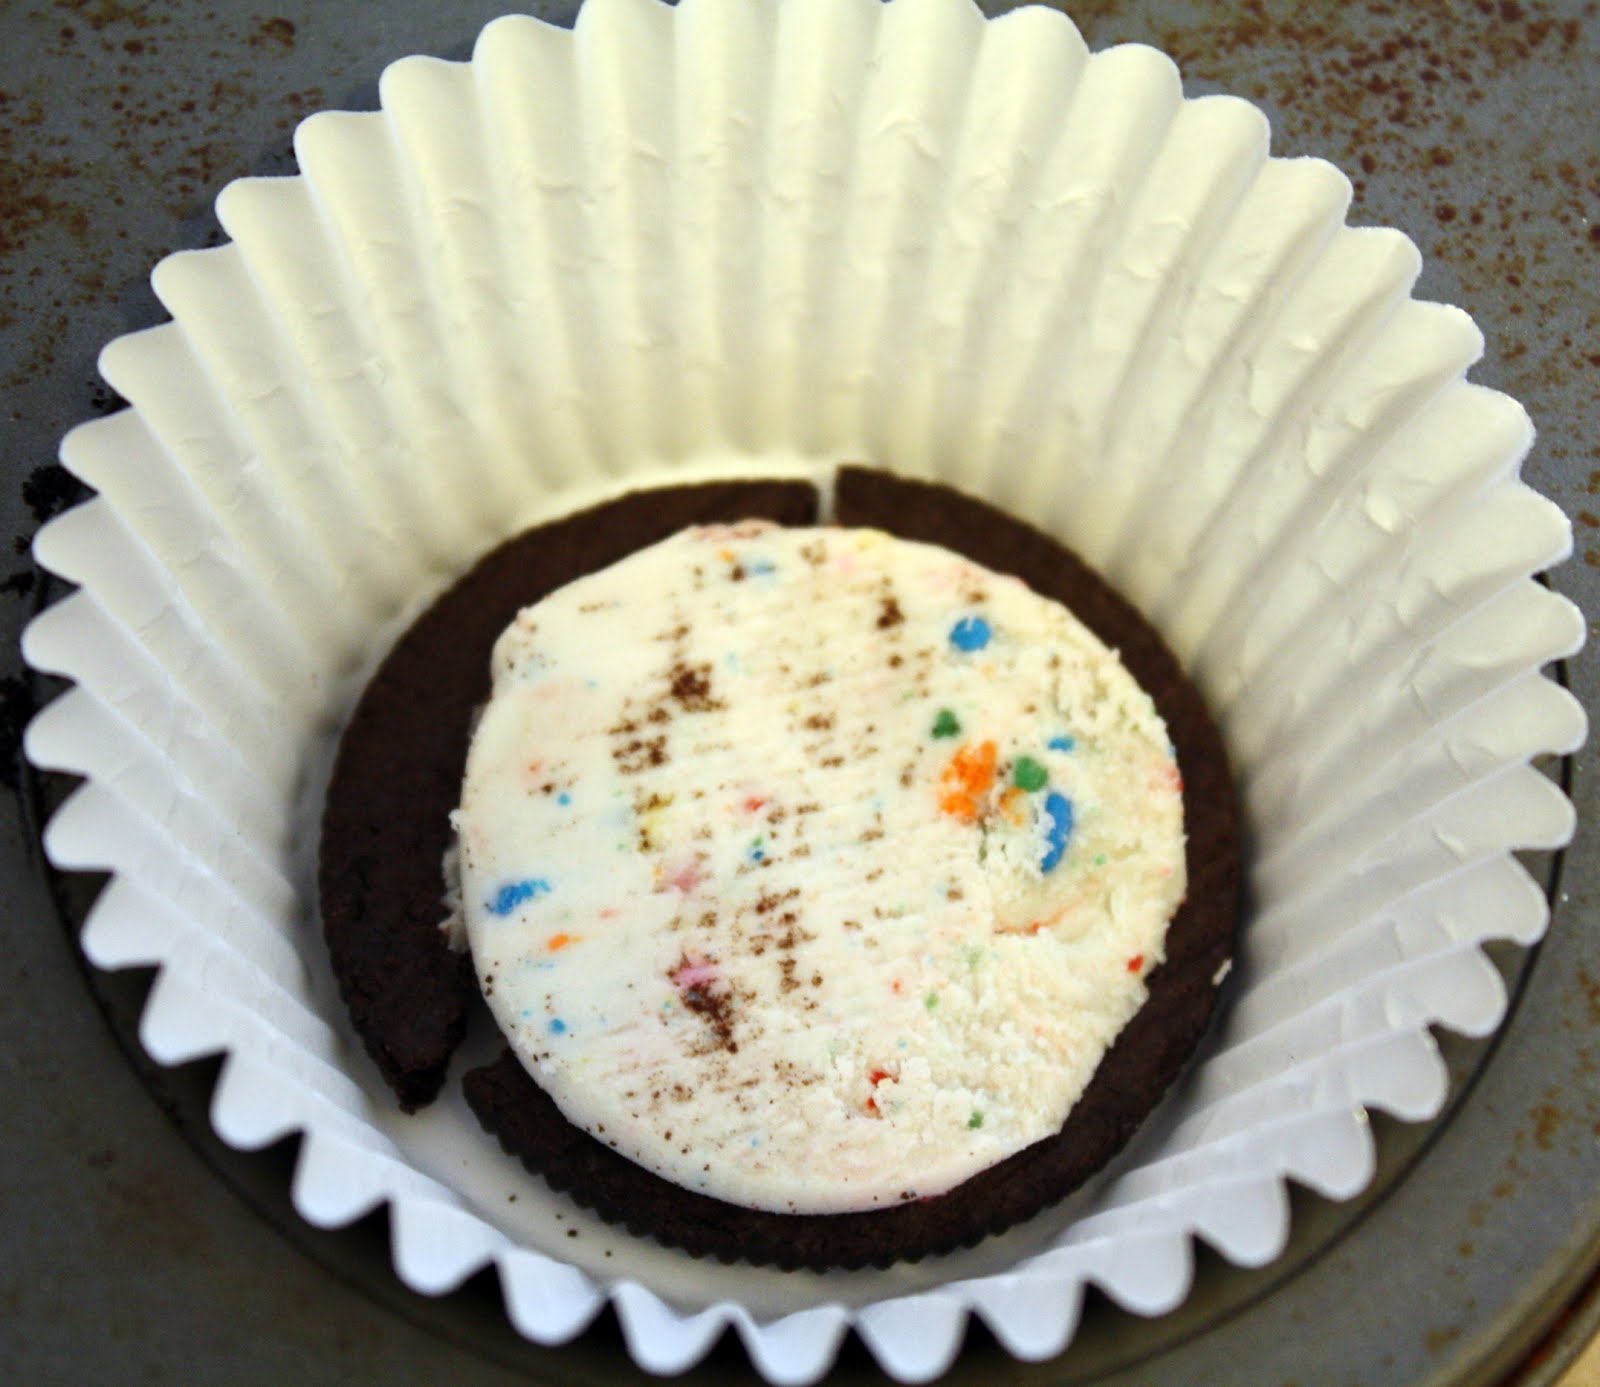 Cake  Oreo Mix with to duncan how mix With cake make pancakes Box Cupcakes hines